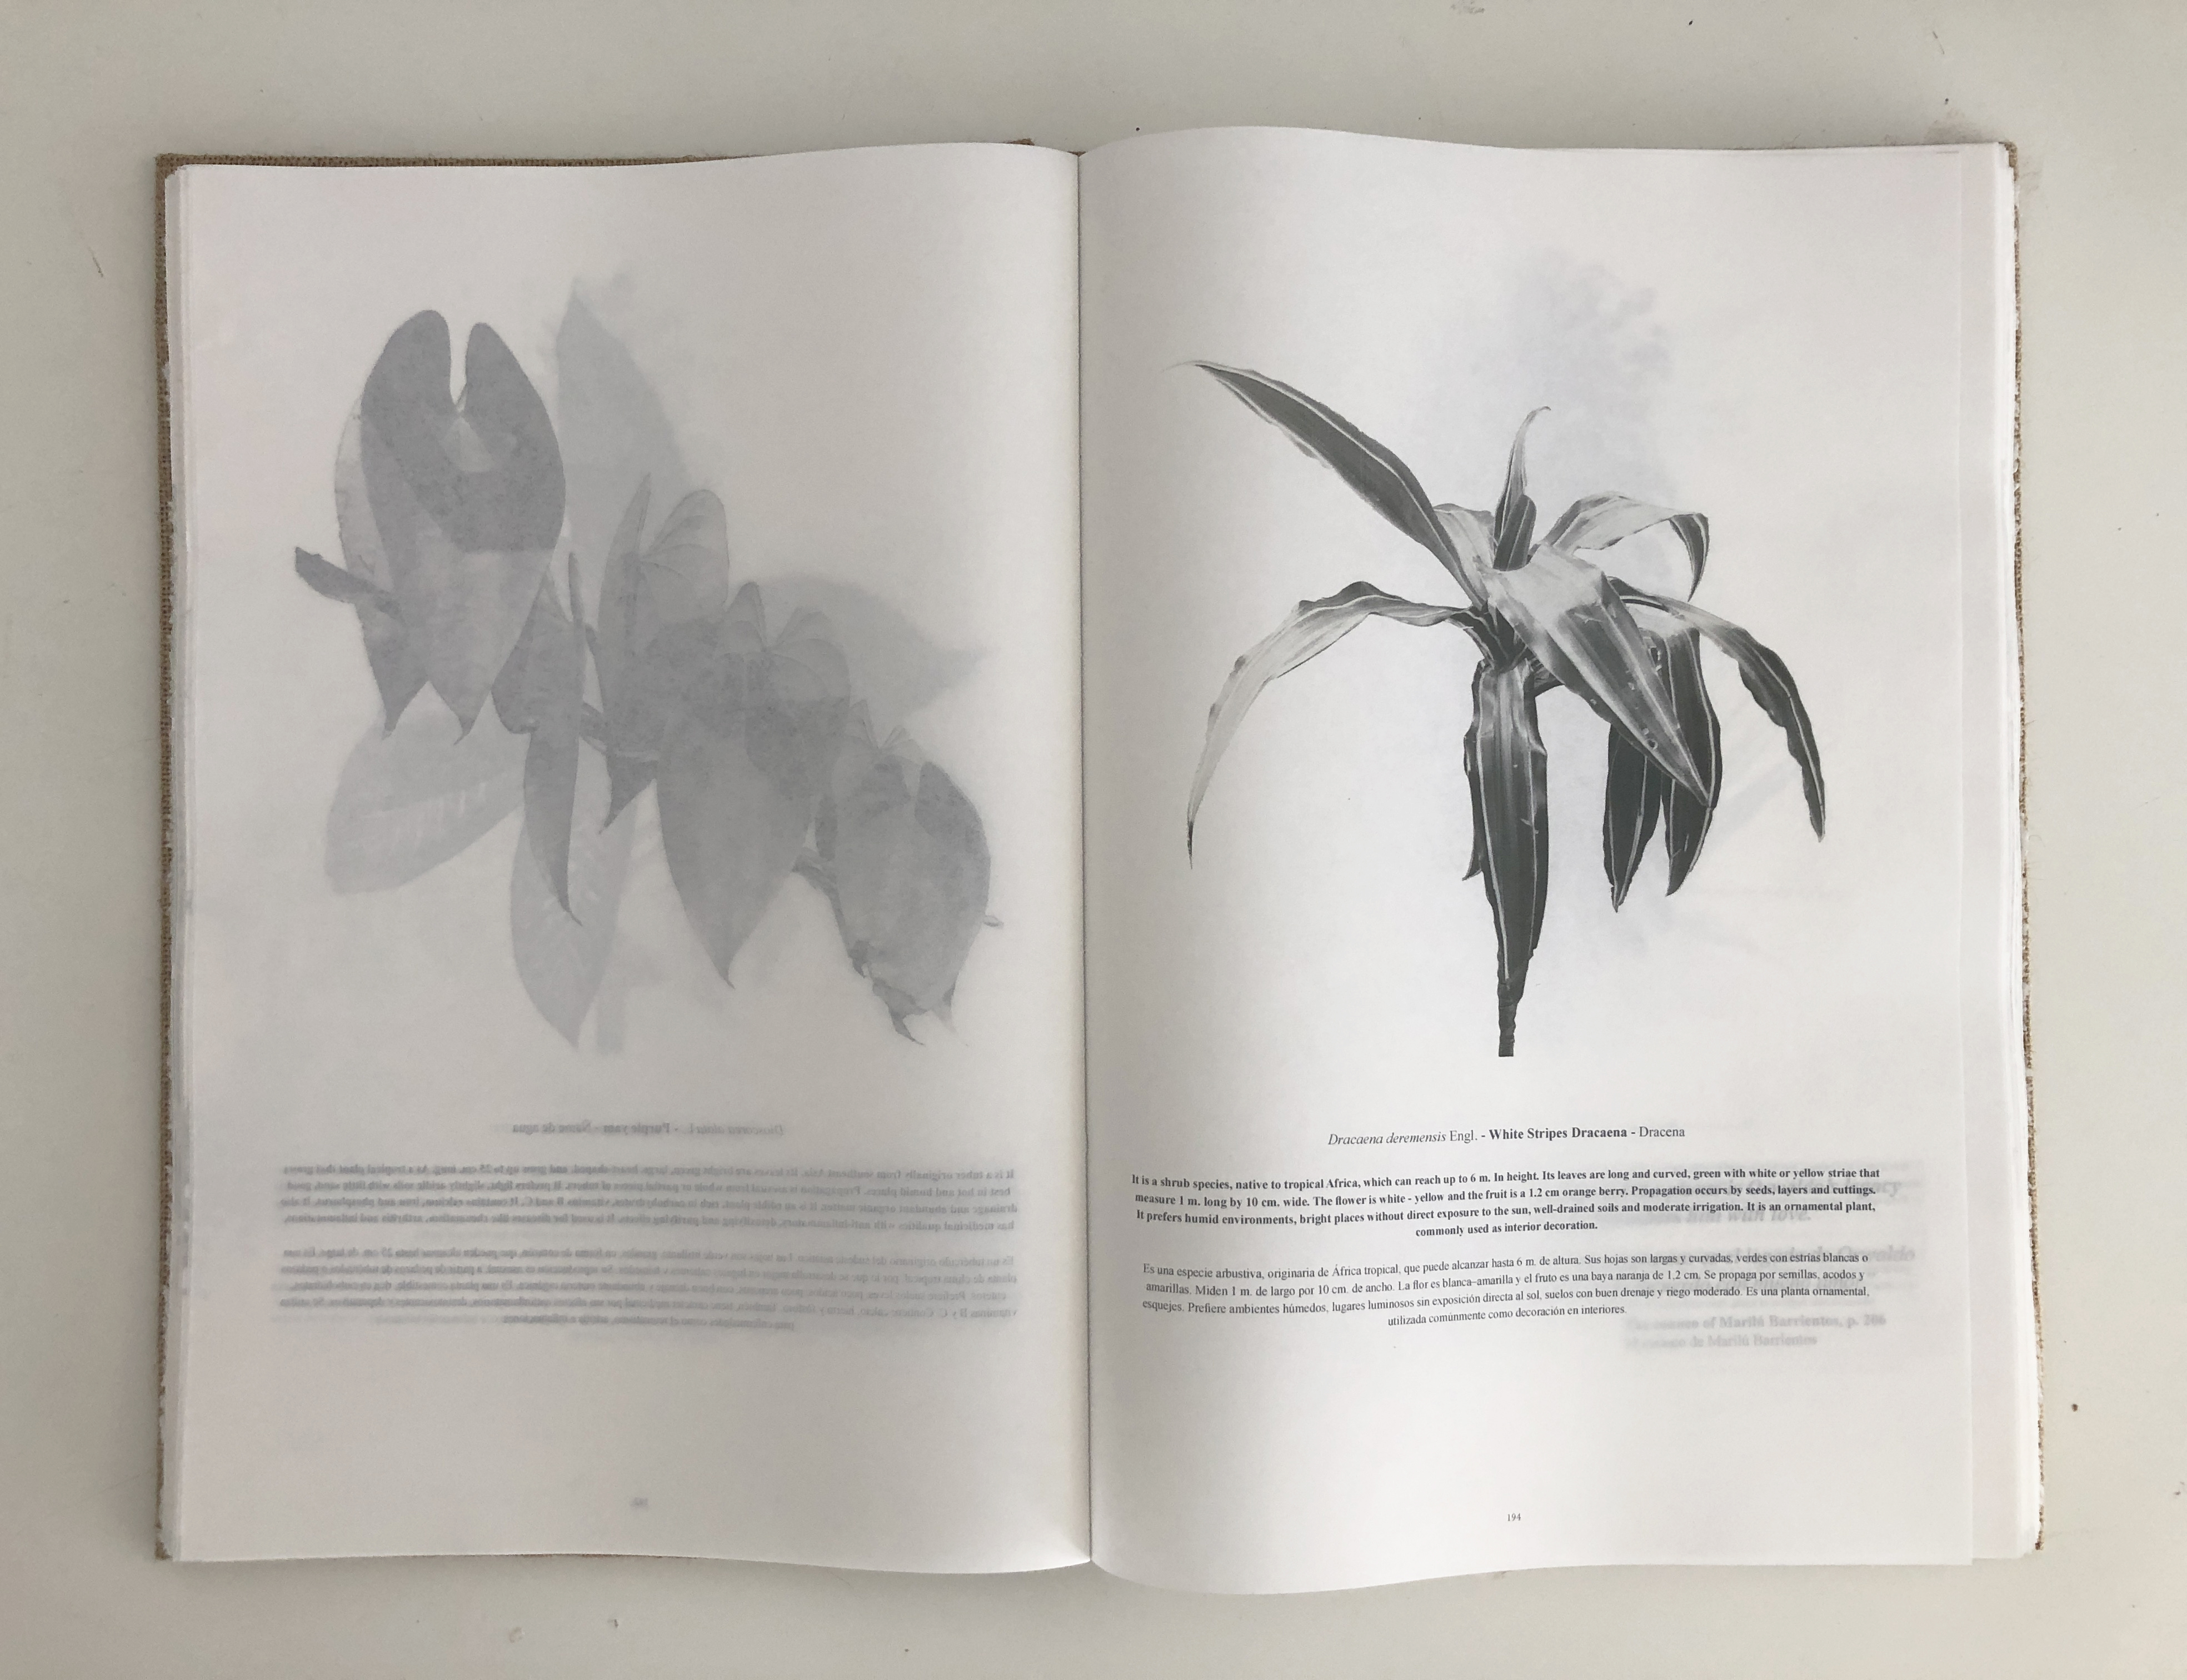 Ethnobotanical Dictionary of Plants from the Gardens of La Palomera